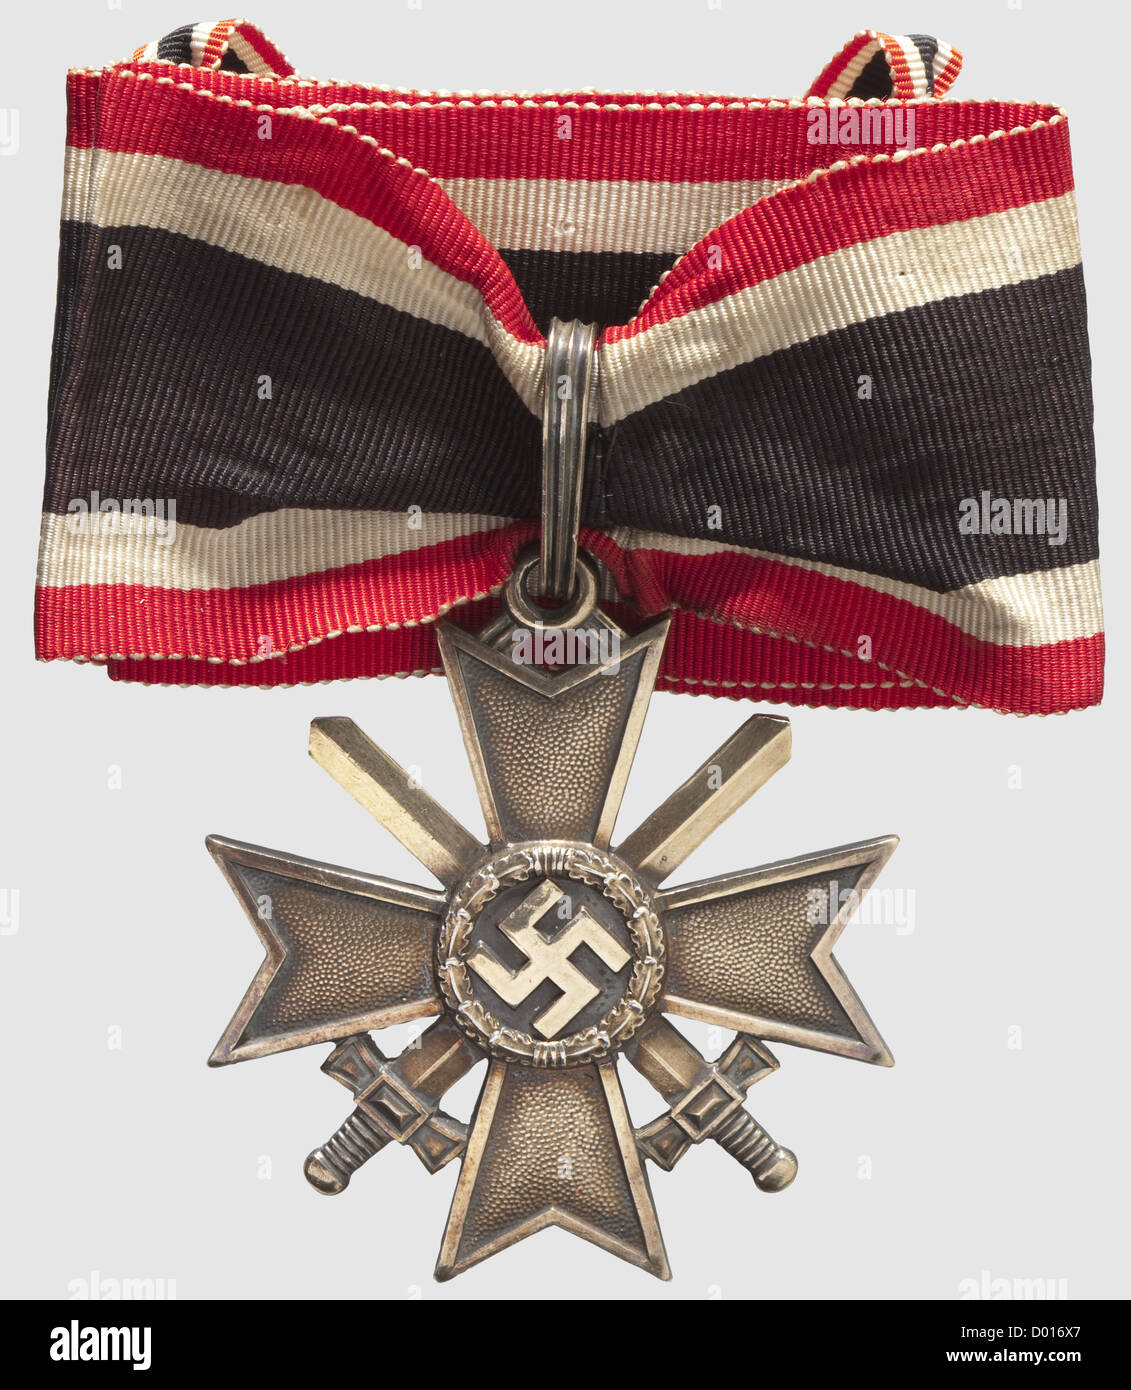 A Knight's Cross of the War Merit Cross of 1939 in Gold with Swords,Gold-plated silver,the edges and raised areas polished. Closed,fluted suspension ring,the lower cross-arm punched '900' and '1'(for Deschler,Munich). Dimensions 53 x 58.5 mm,weight 43 g. Customised neck ribbon,length 50 cm.(Nie 7.04.04 2). The gold class was instituted on 8 July 1944 and only produced in very small numbers. No bestowals are known to have occurred. This example comes from the awards hoard hidden by the Orders Chancellery at Kleßheim Castle near Salzburg,which was subse,Additional-Rights-Clearences-Not Available Stock Photo